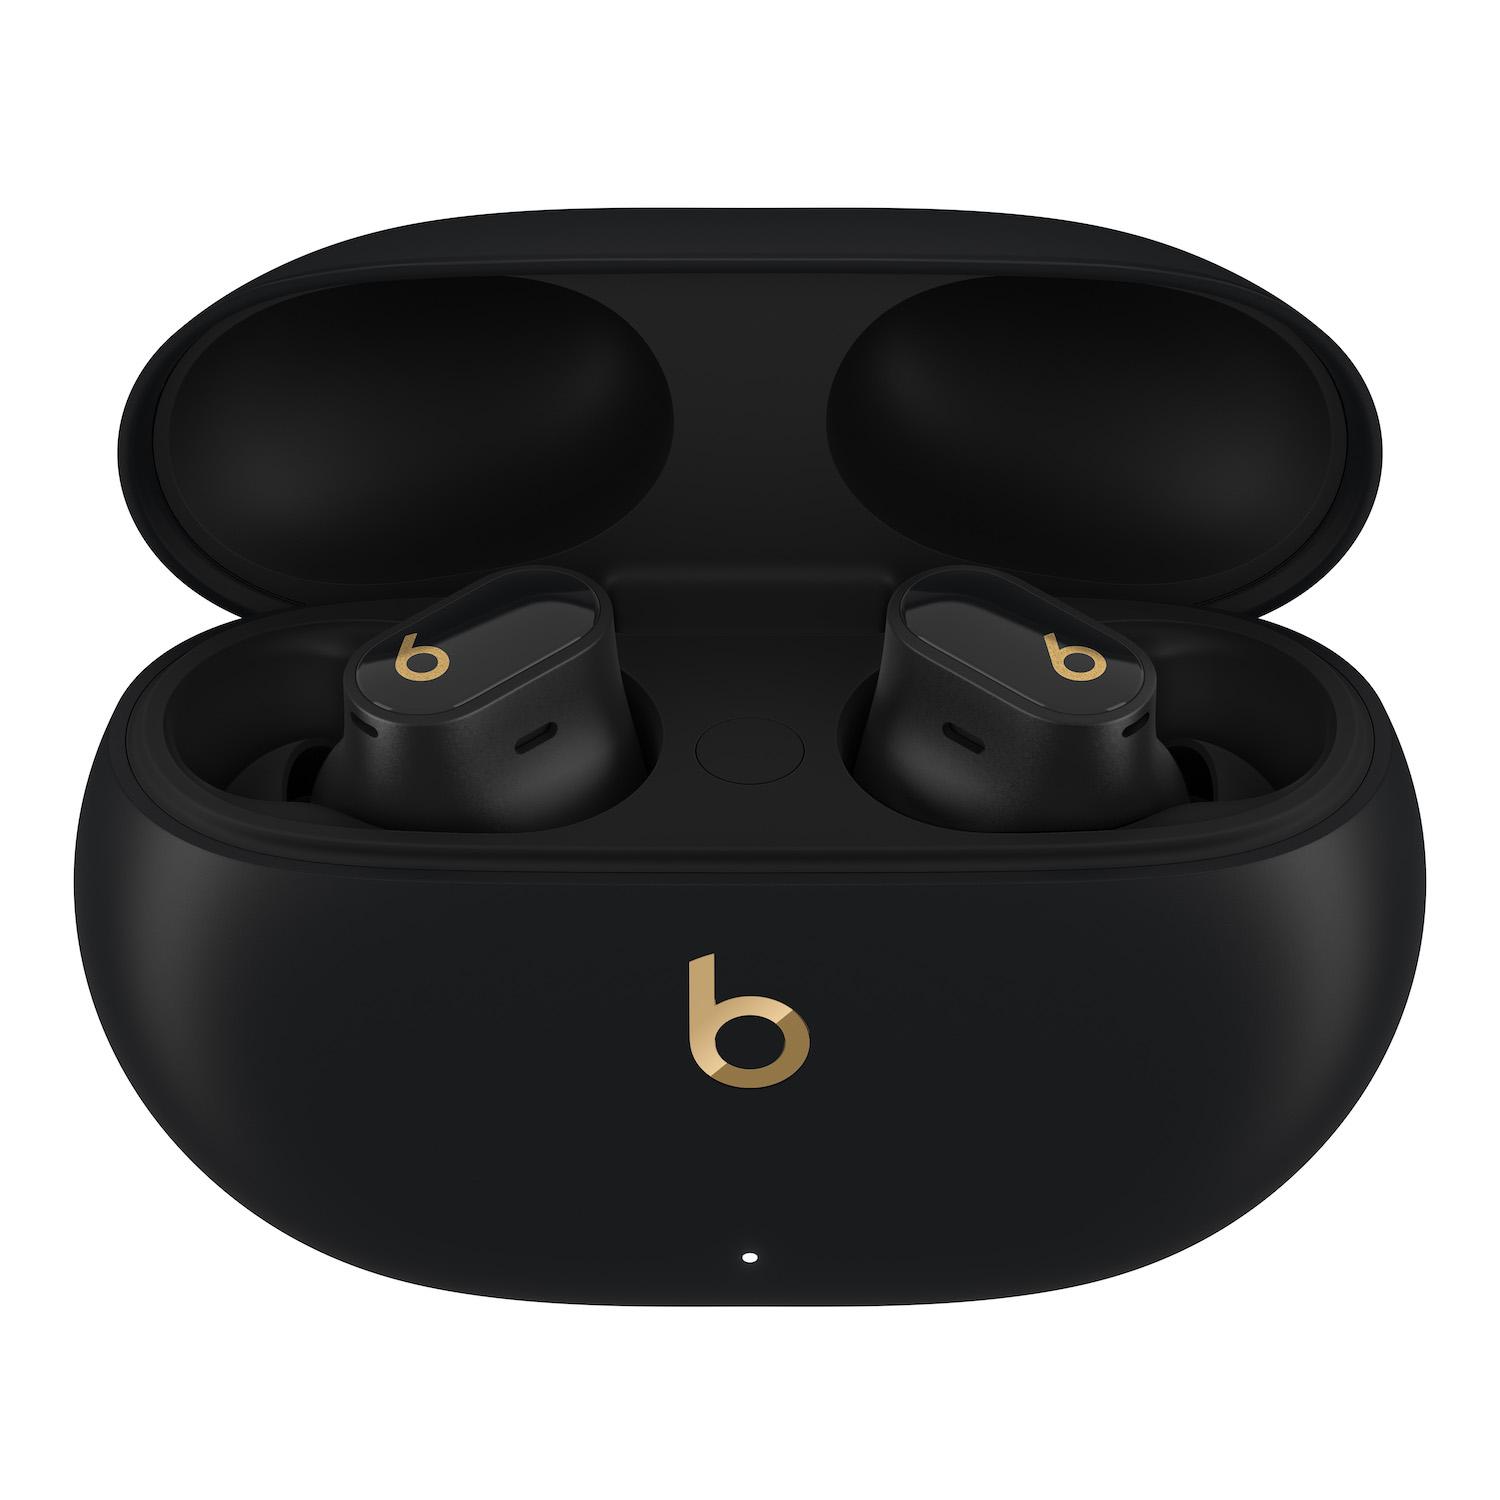 BEATS Studio Buds S Wireless Bluetooth Noise-Cancelling Earbuds - Black, Black